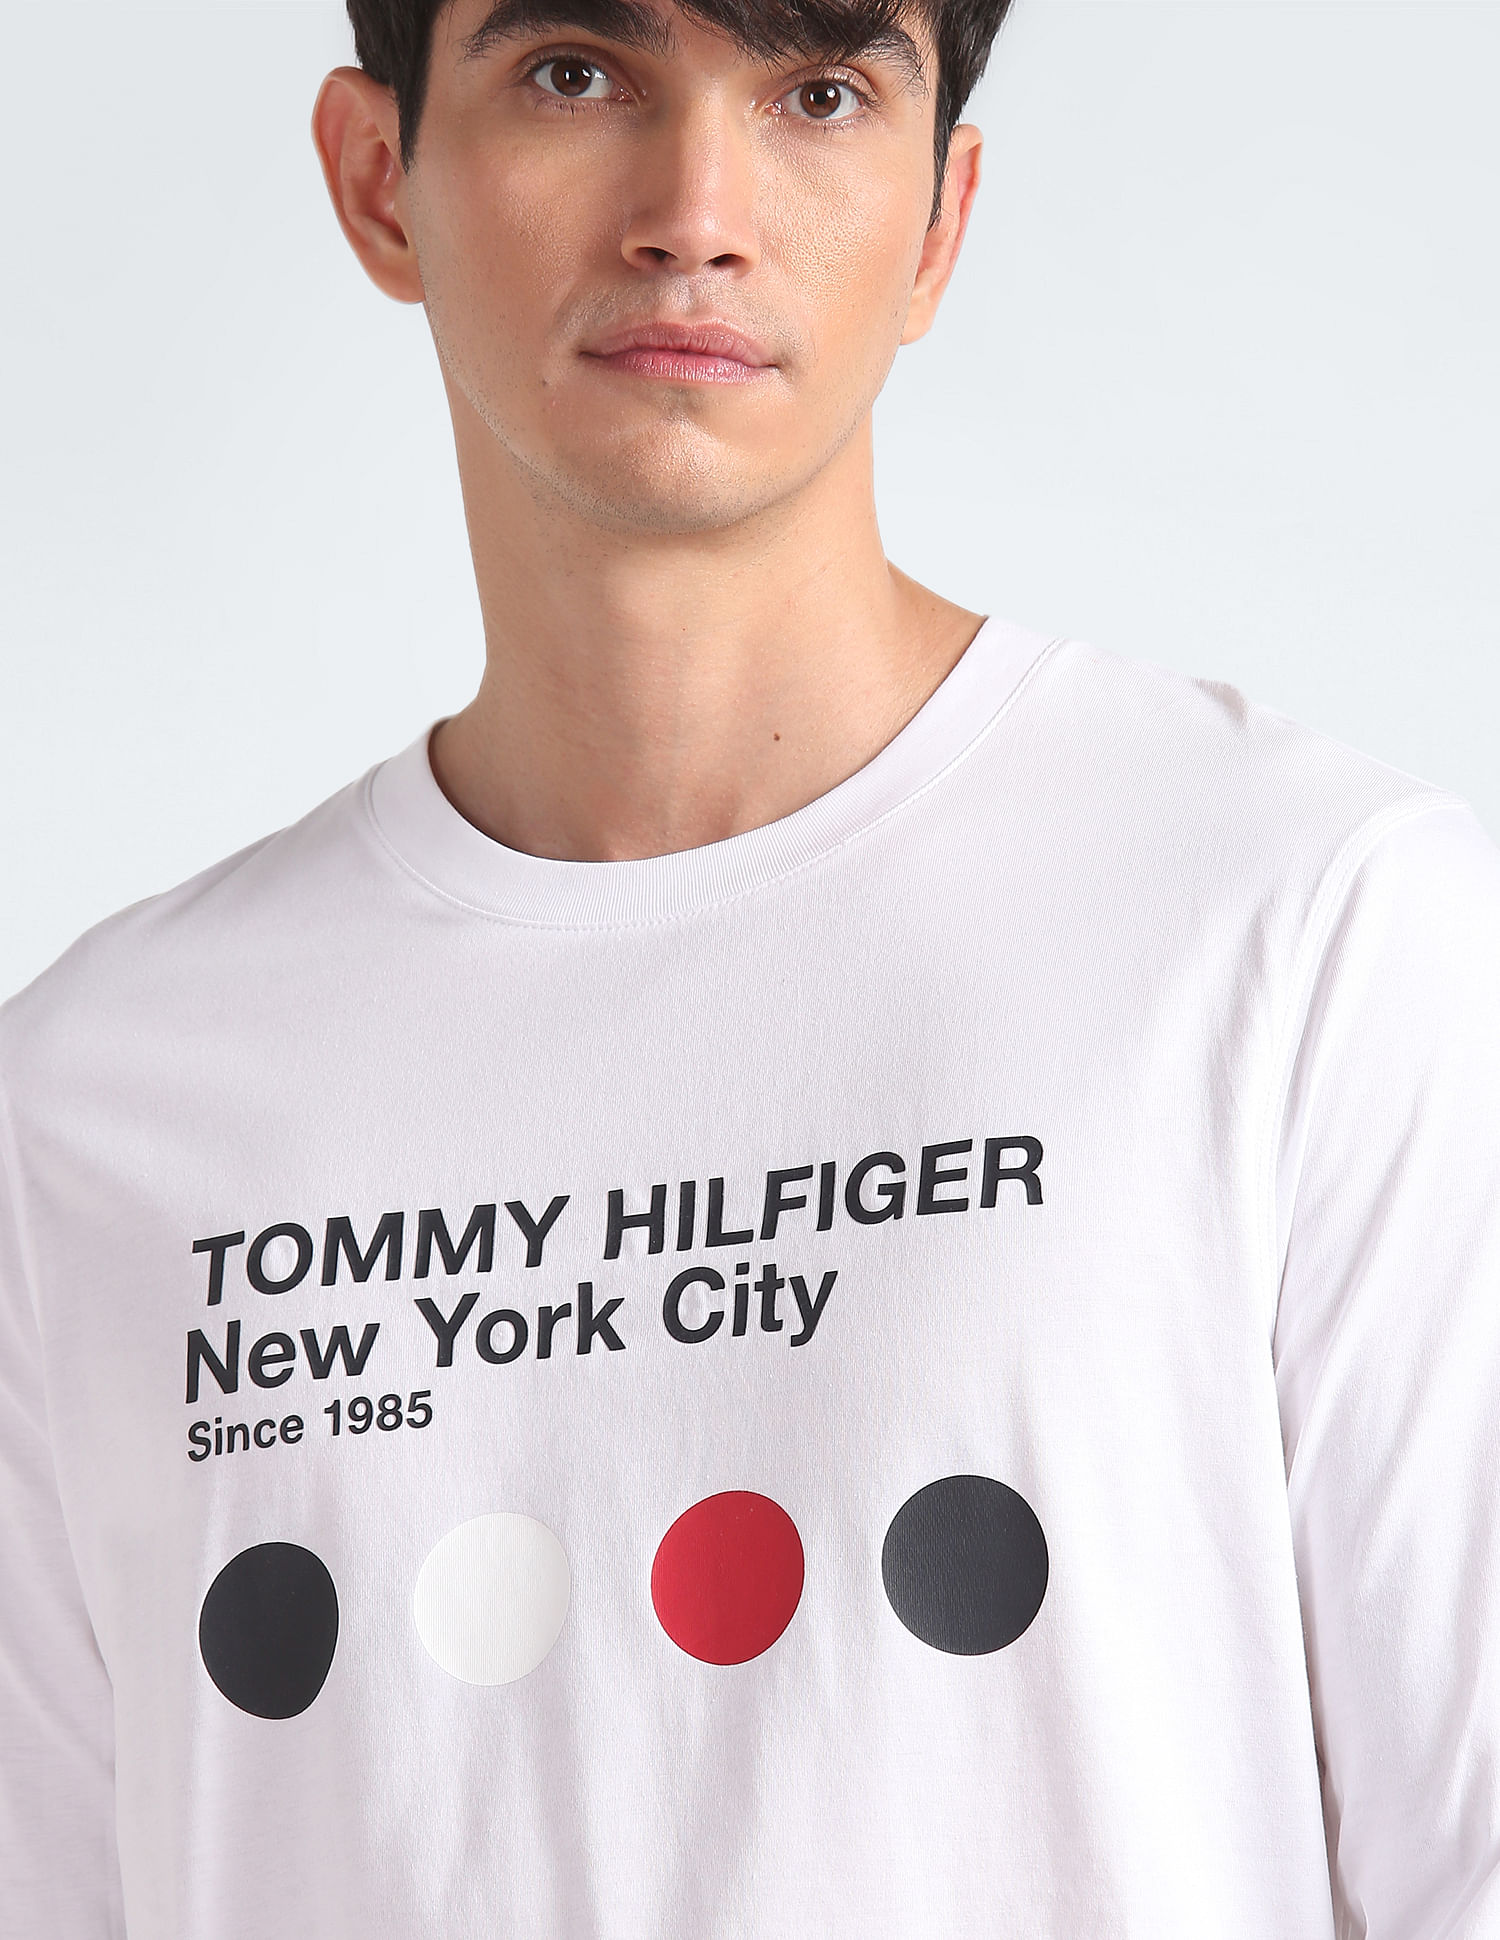 Buy Tommy Hilfiger Typographic Print Long Sleeve T-Shirt | T-Shirts